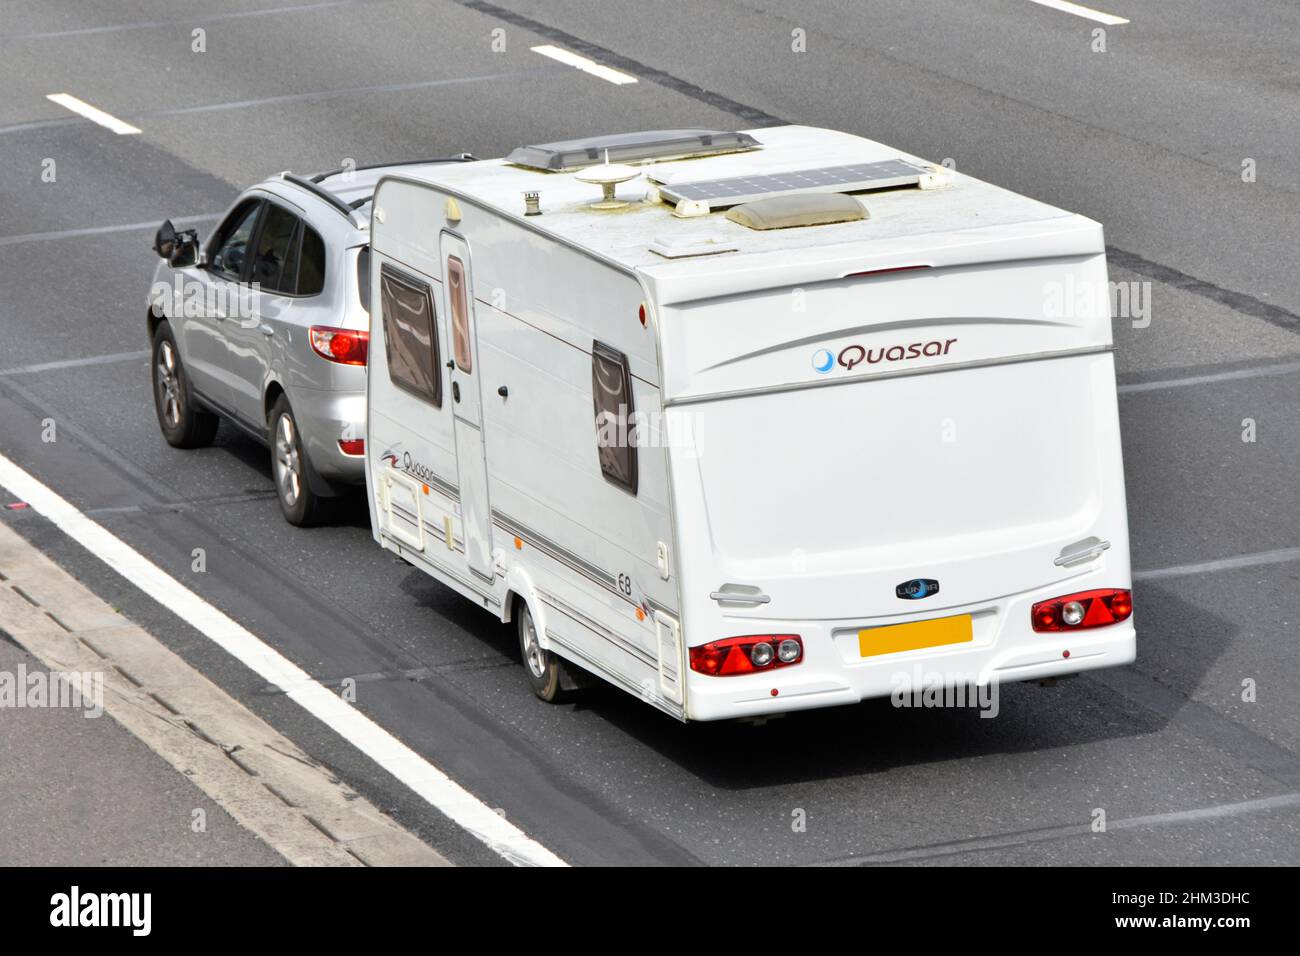 Holiday caravan Quosar brand aerial view roof mounted solar panel television aerial gas flue vent & rooflight side view car towing on UK motorway road Stock Photo